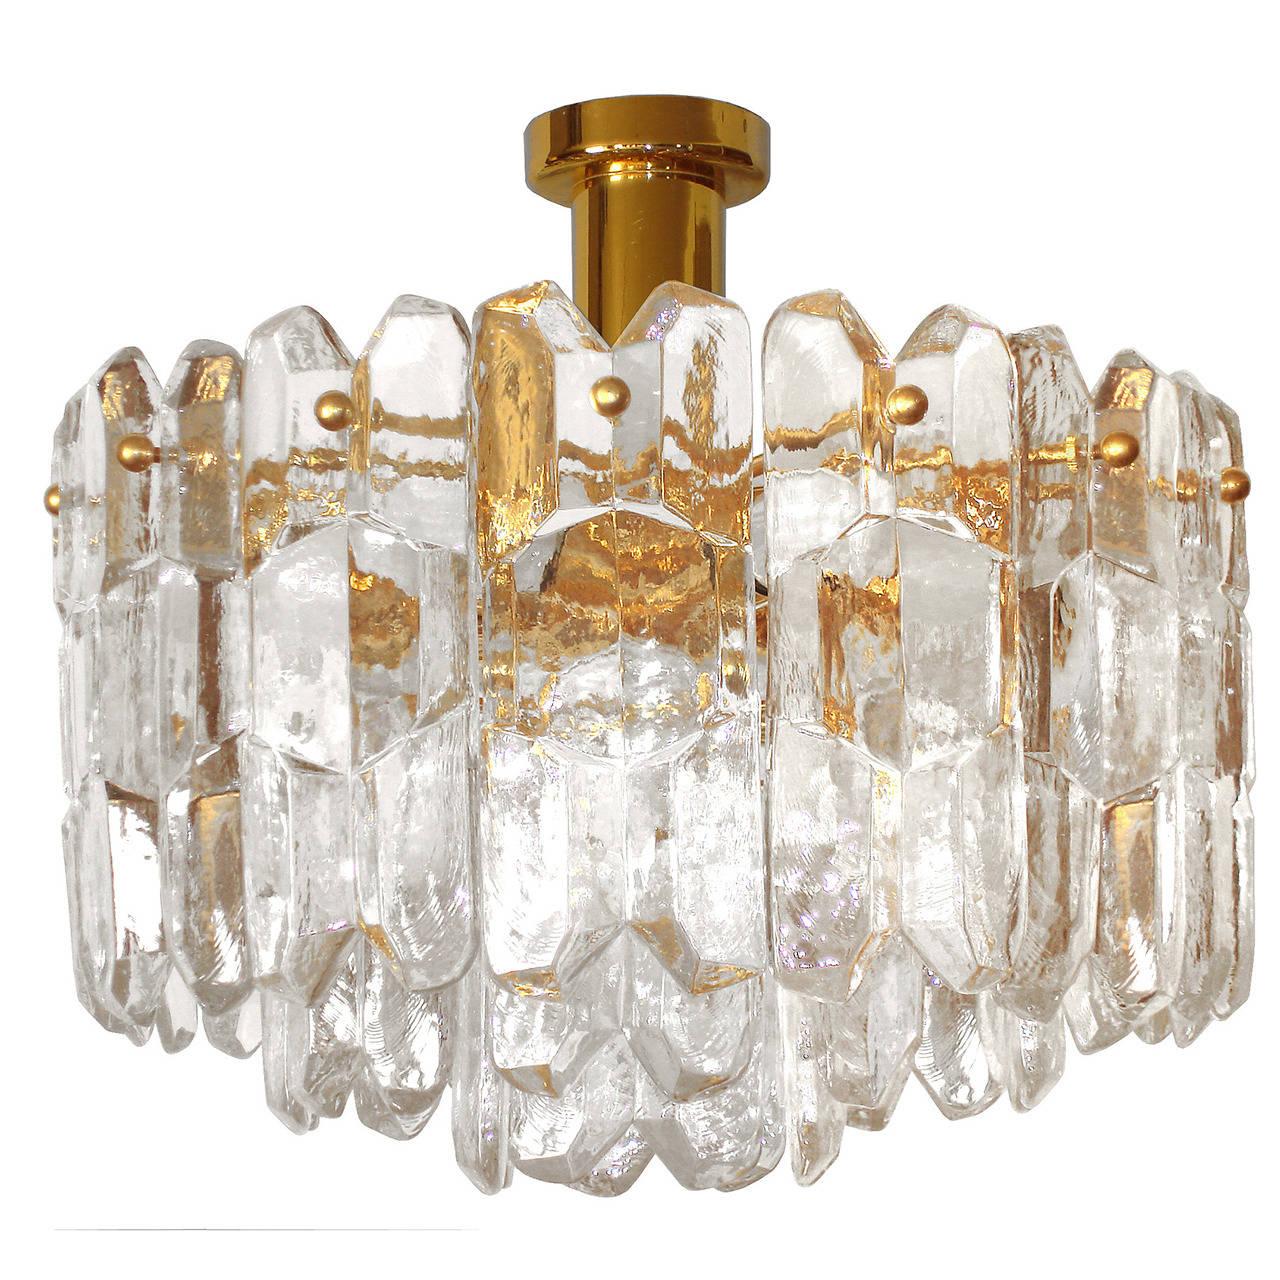 A chandelier consisting of multiple pieces of glass hung from a brass frame with brass hardware by J. T. Kalmar.

Austrian, Circa 1960's 

Four (4) Available.